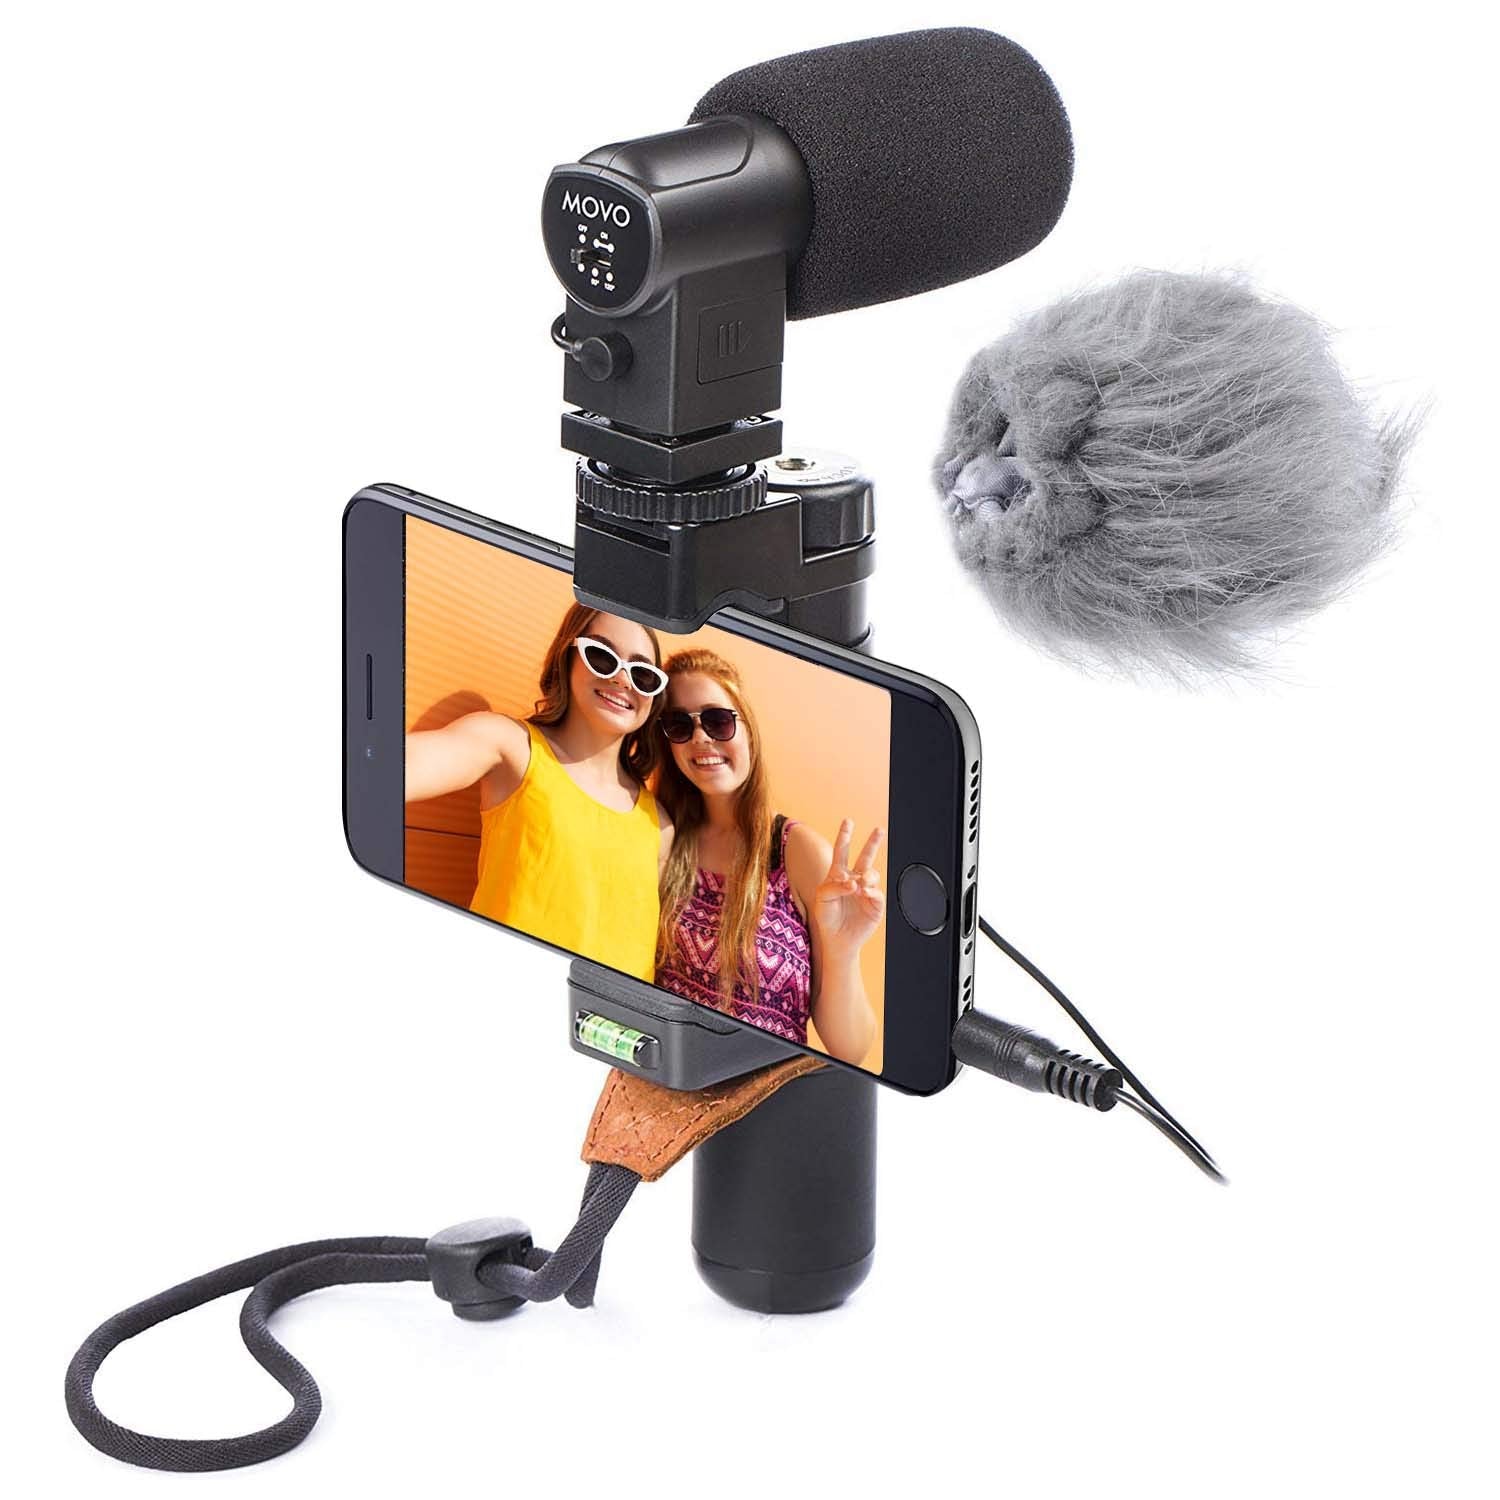 Movo Smartphone Video Rig with Stereo Microphone, Grip Handle, Wrist Strap for iPhone 5, 5S, 6, 6S, 7, 8, X, XS, XS Max, 11, 11 Pro, Samsung Galaxy S5, S6, S7, S8, S9 - Vlogging Equipment, Vlog Mic  - Like New